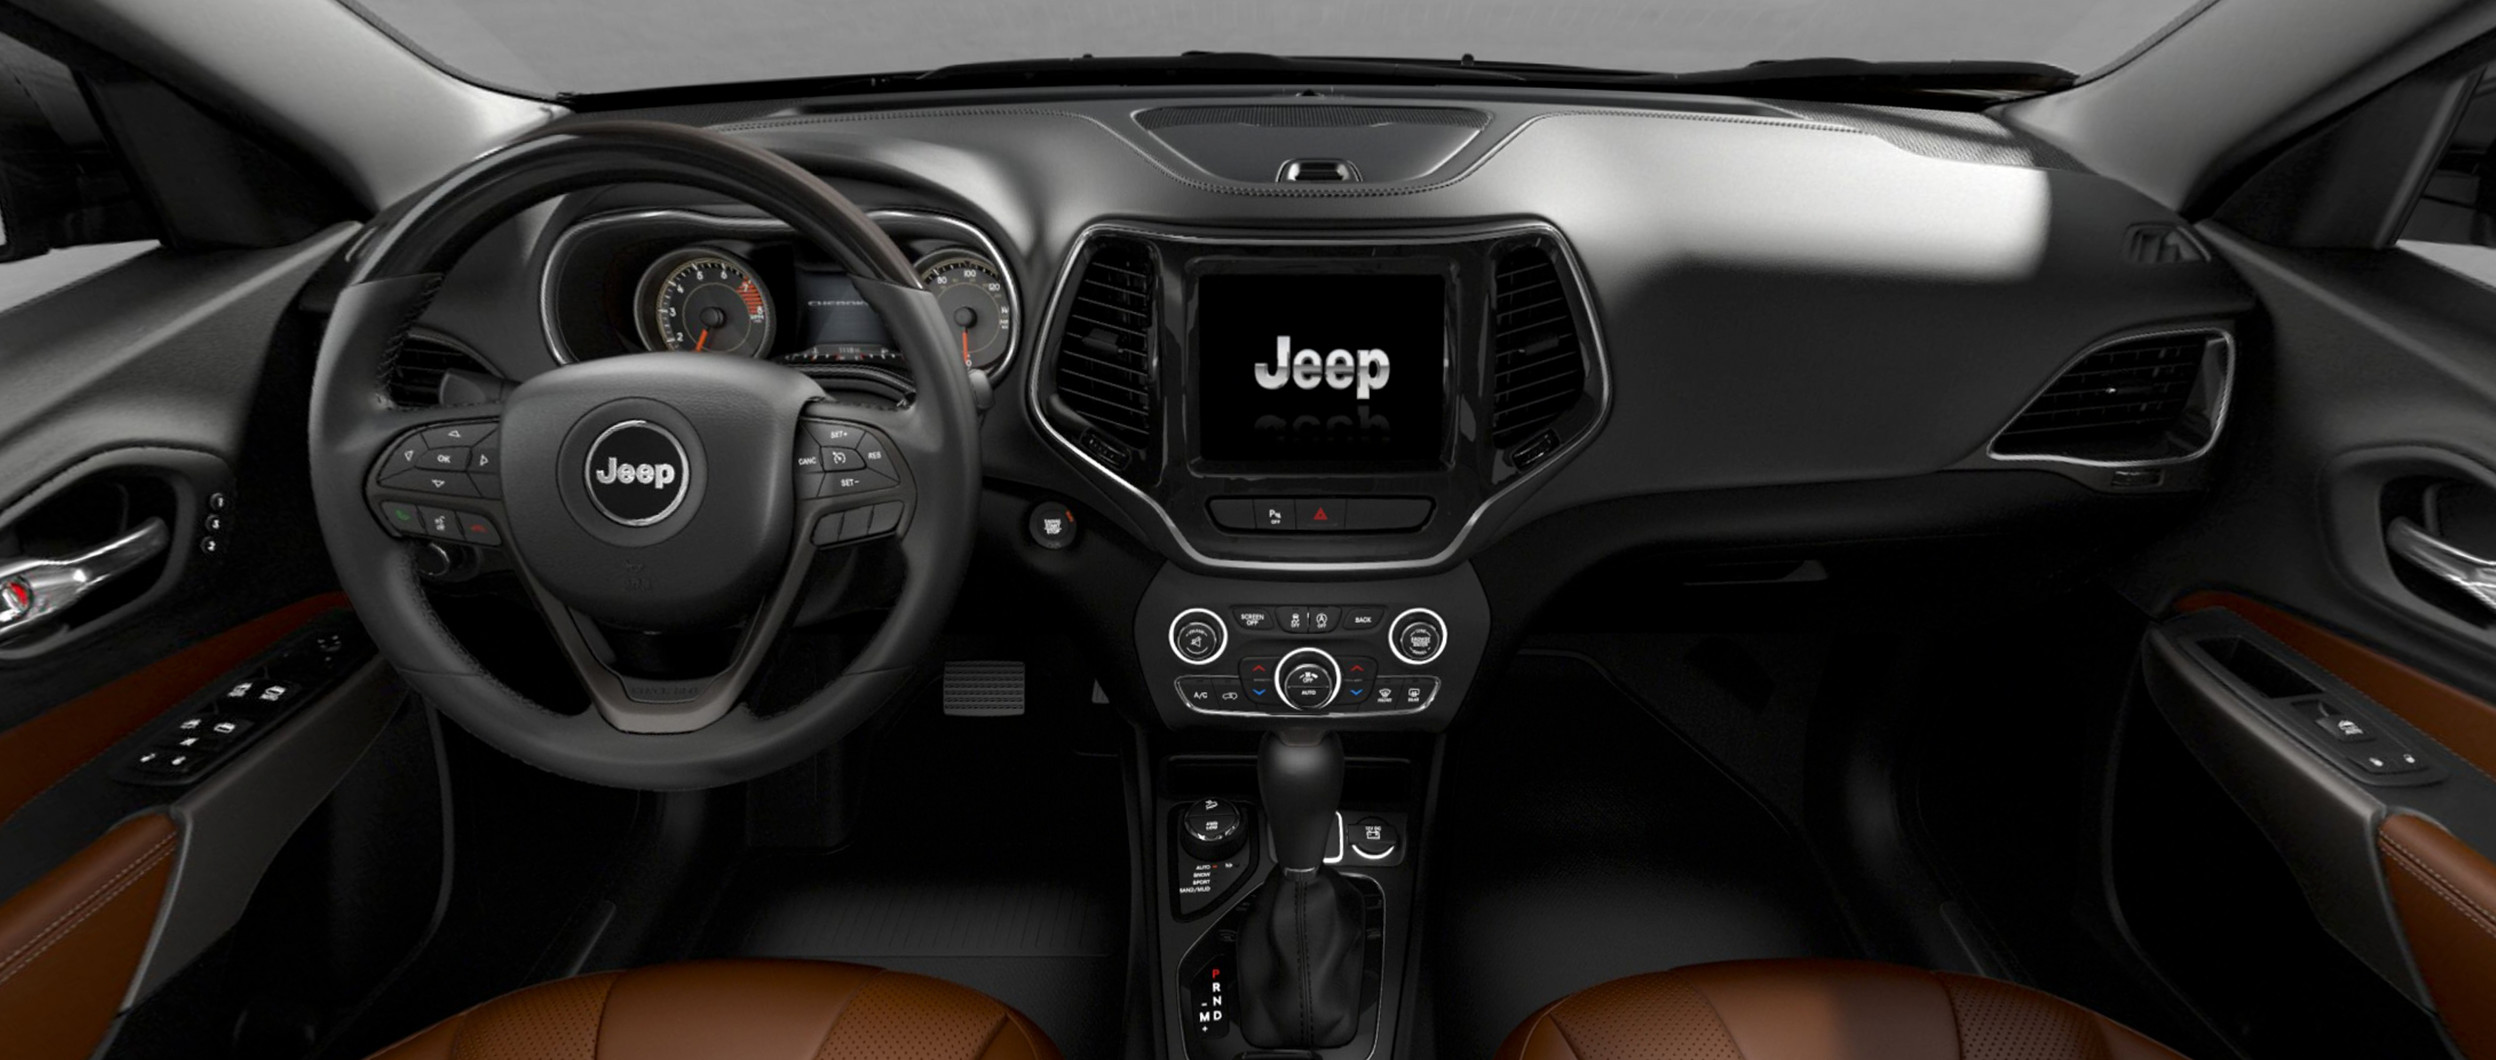 New 2019 Jeep Cherokee Interior Photos And Images